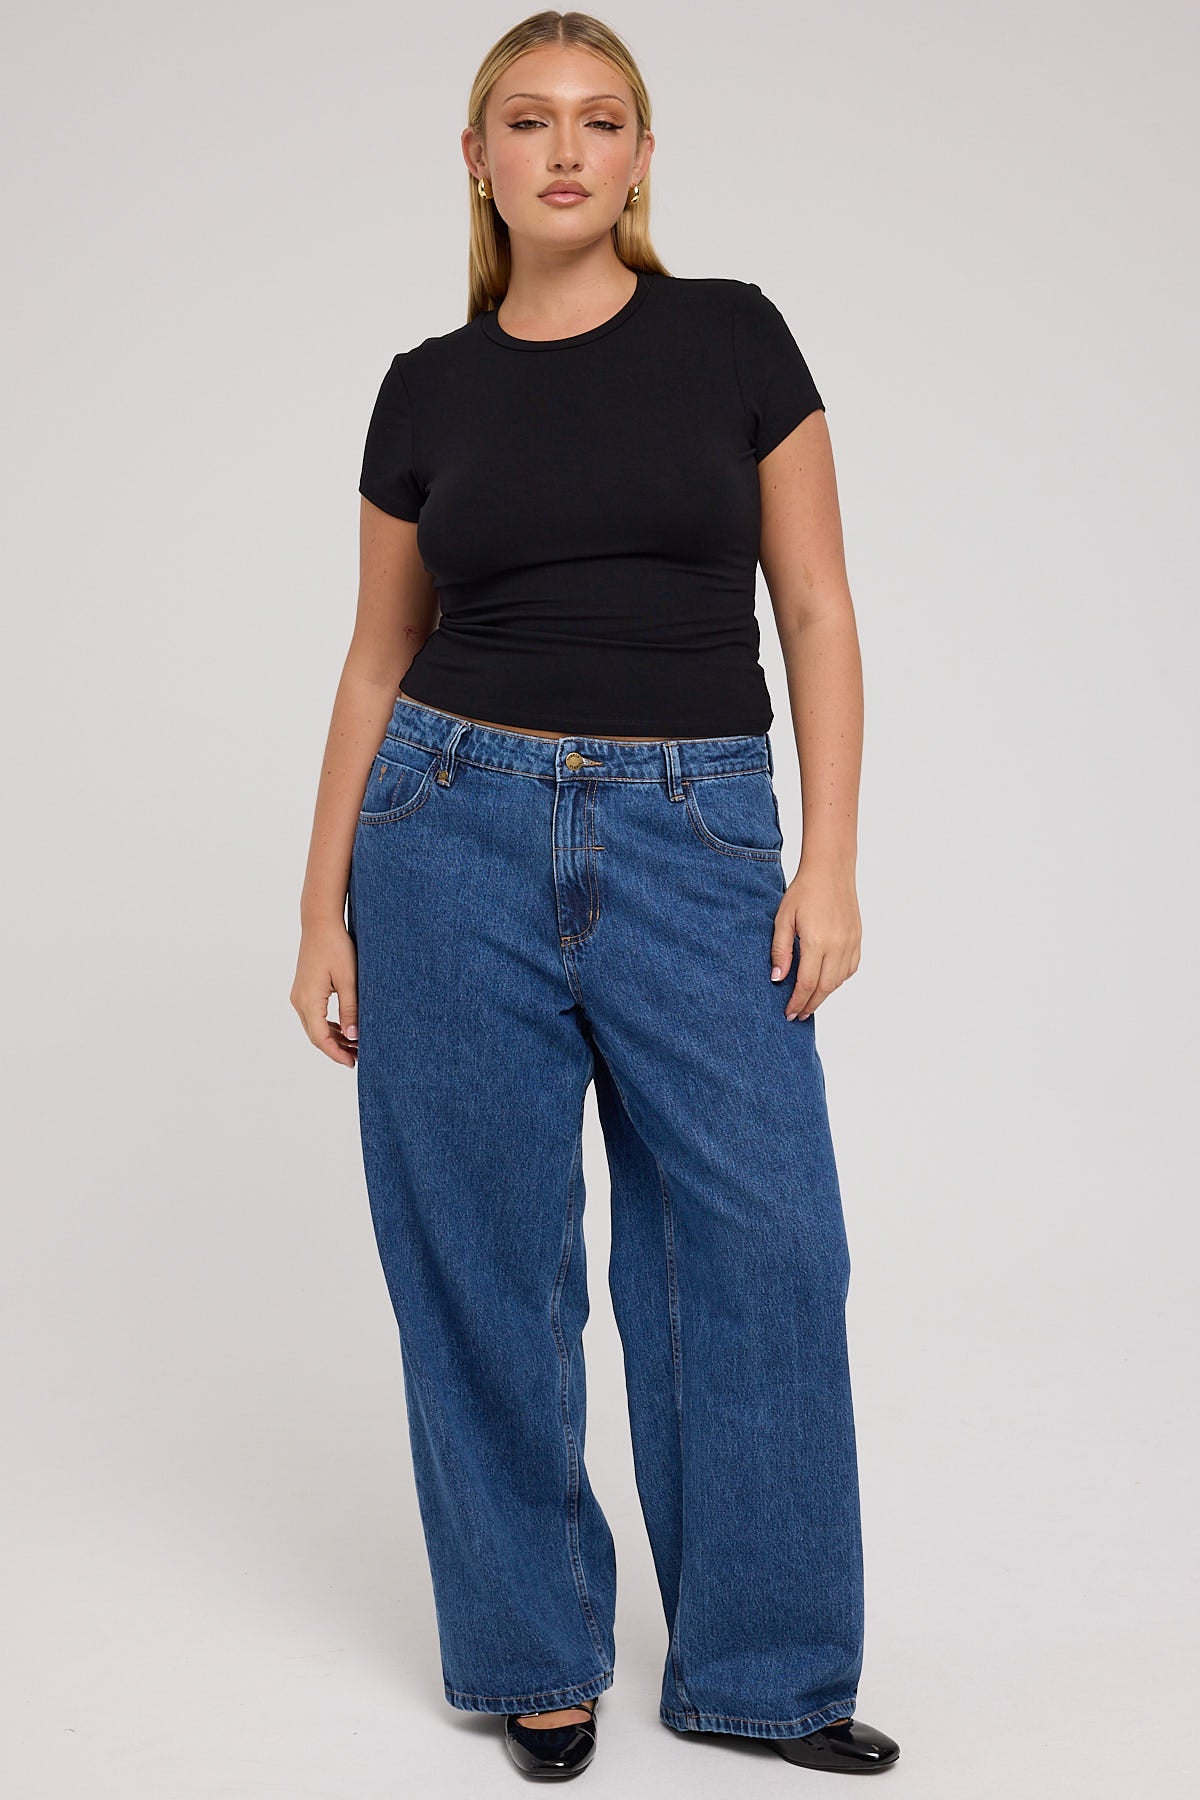 Thrills Billie Low Rise Baggy Jean Rinsed Blues